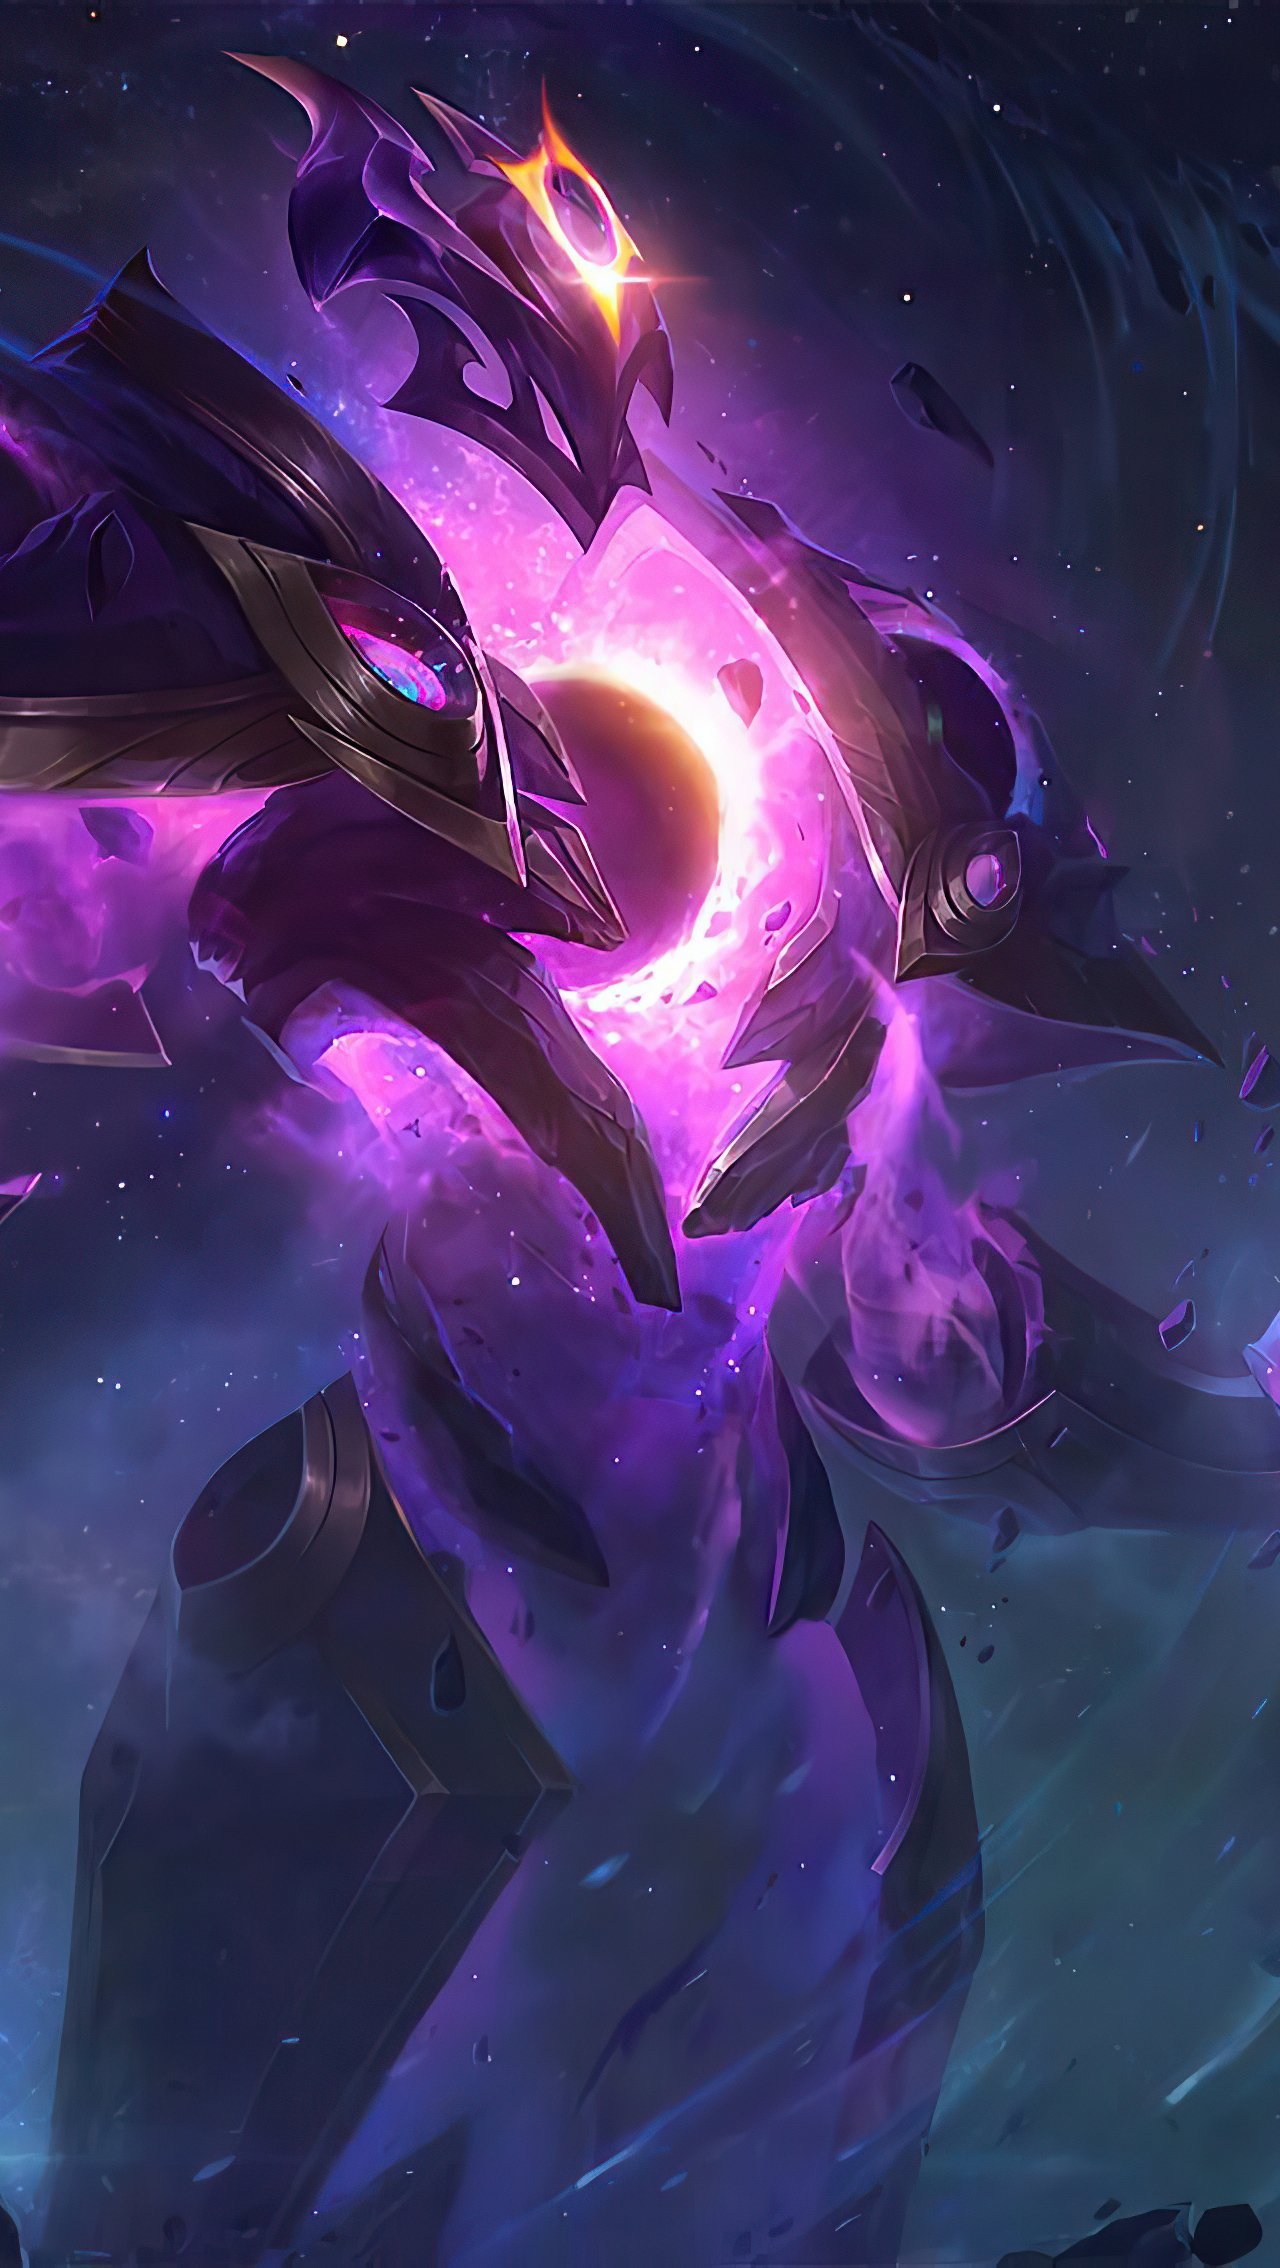 Wallpaper Xerath The Magus Ascendant from League of legends Vertical